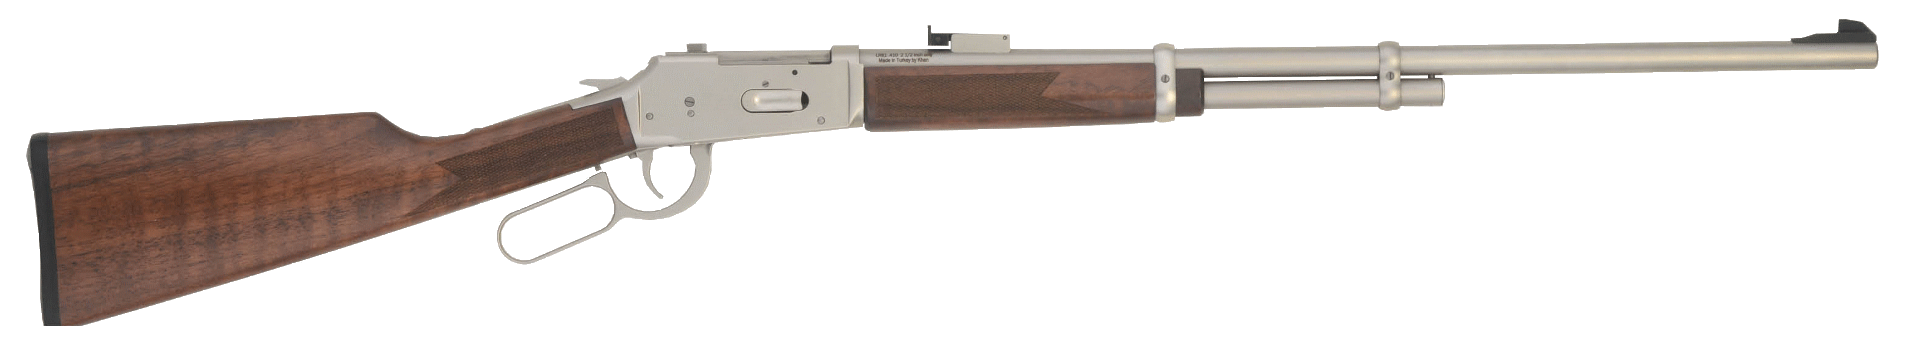 Level Up with TriStar's new LR94 Lever Action 410 Shotgun